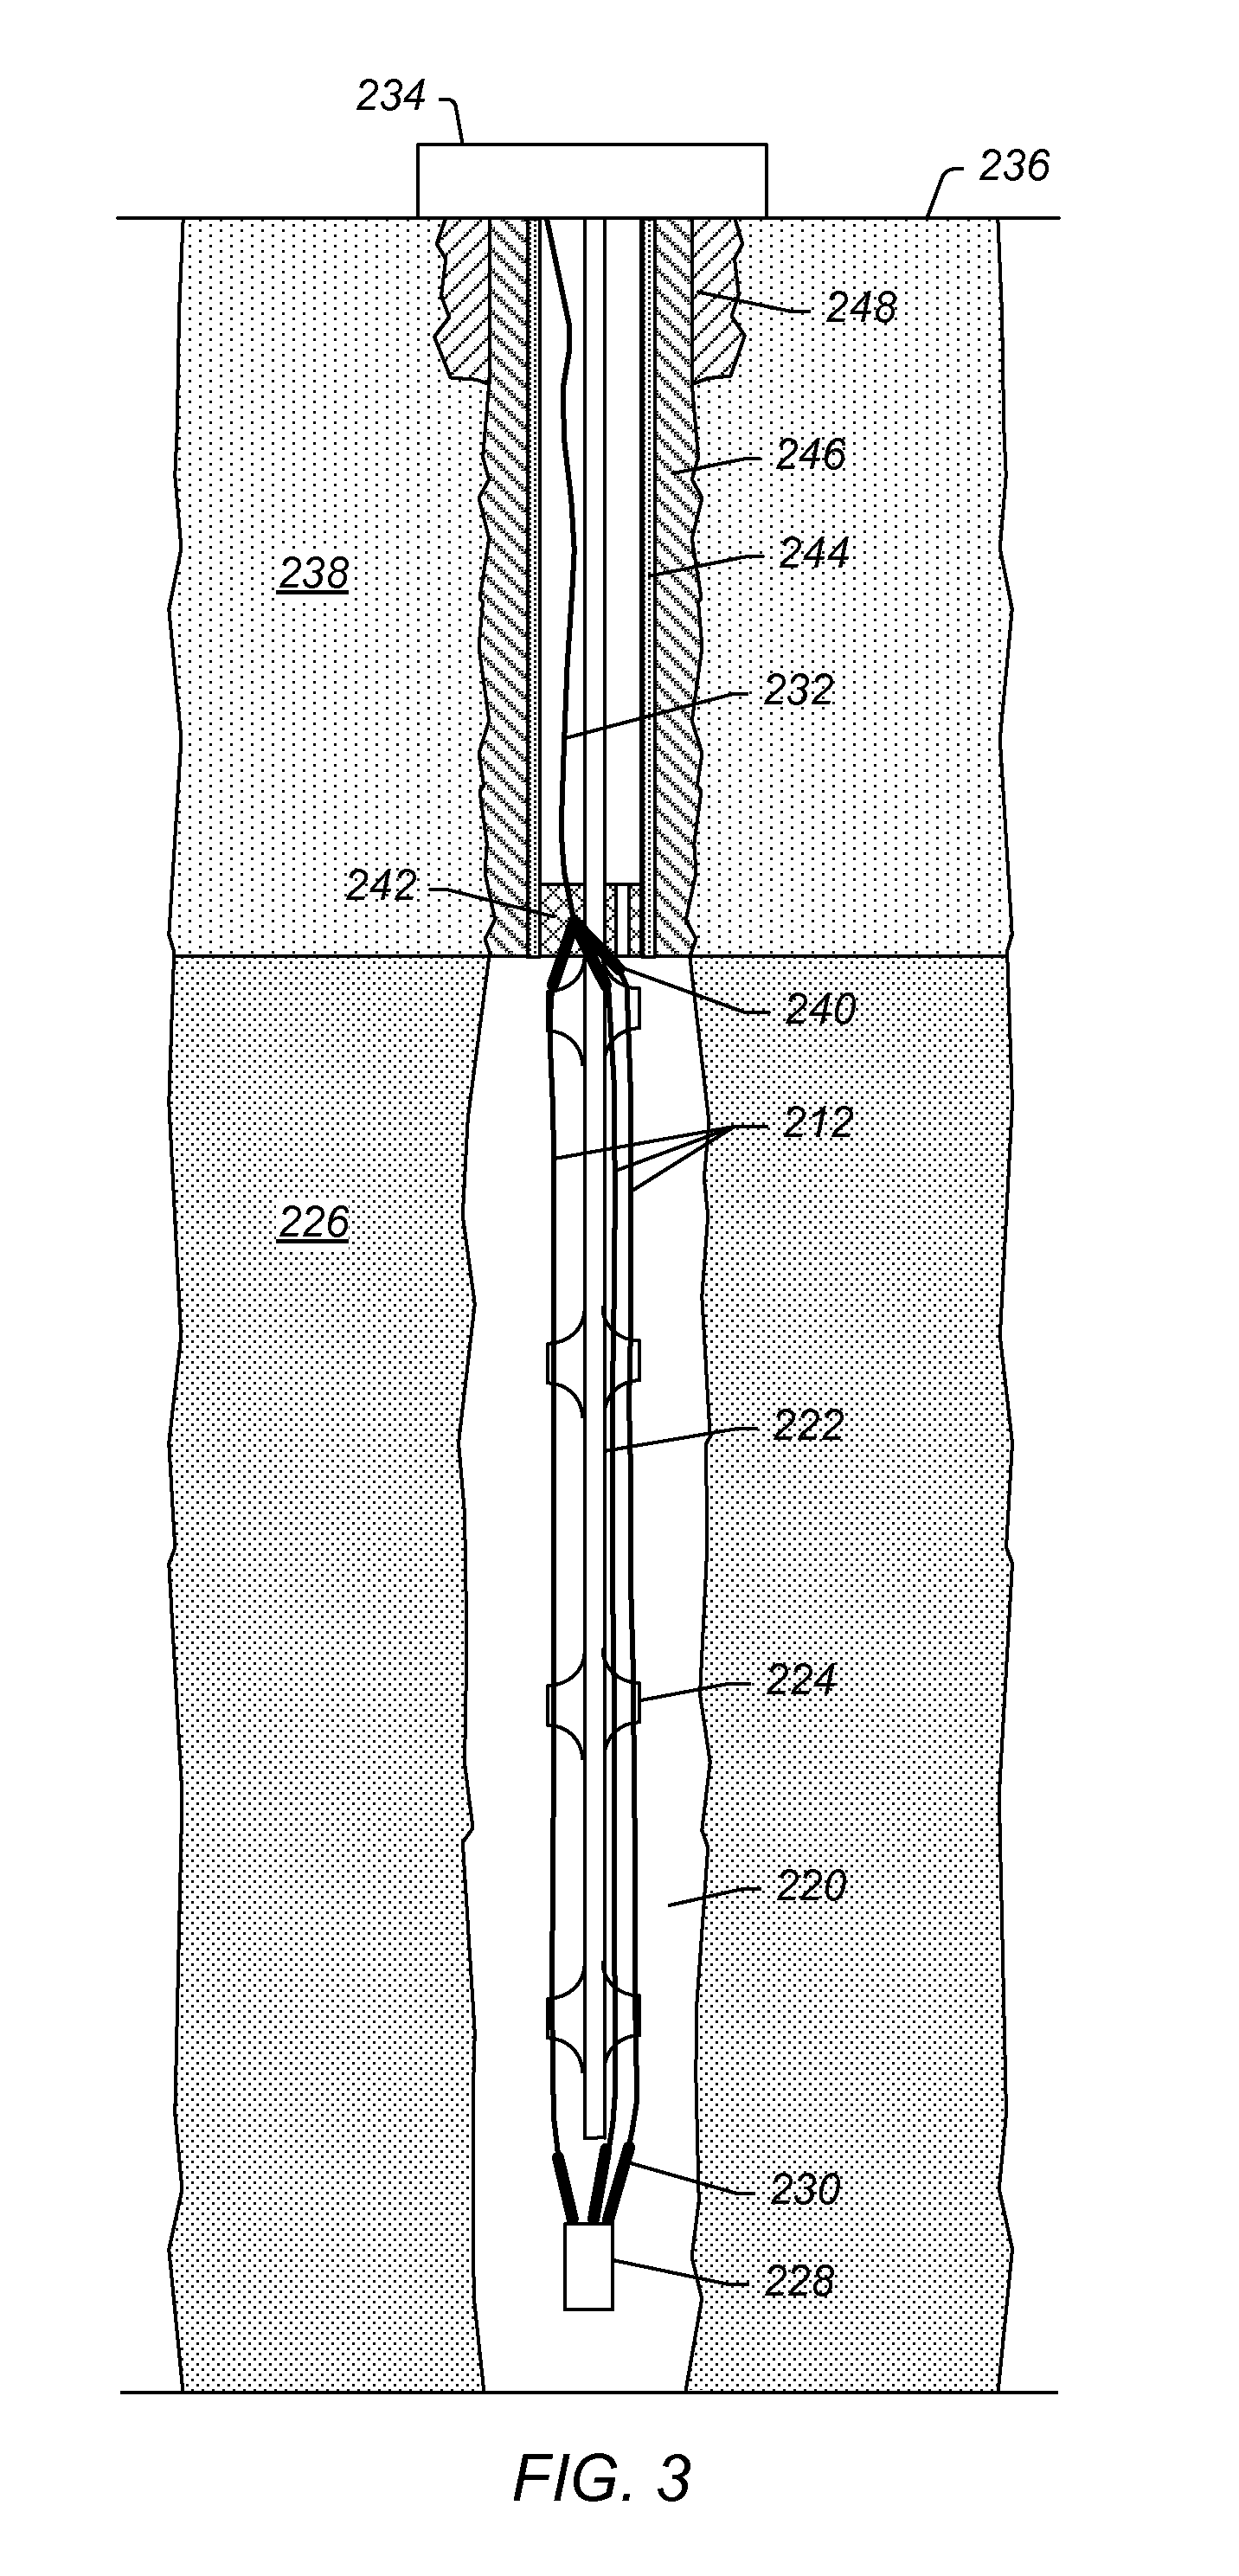 Hydroformed splice for insulated conductors